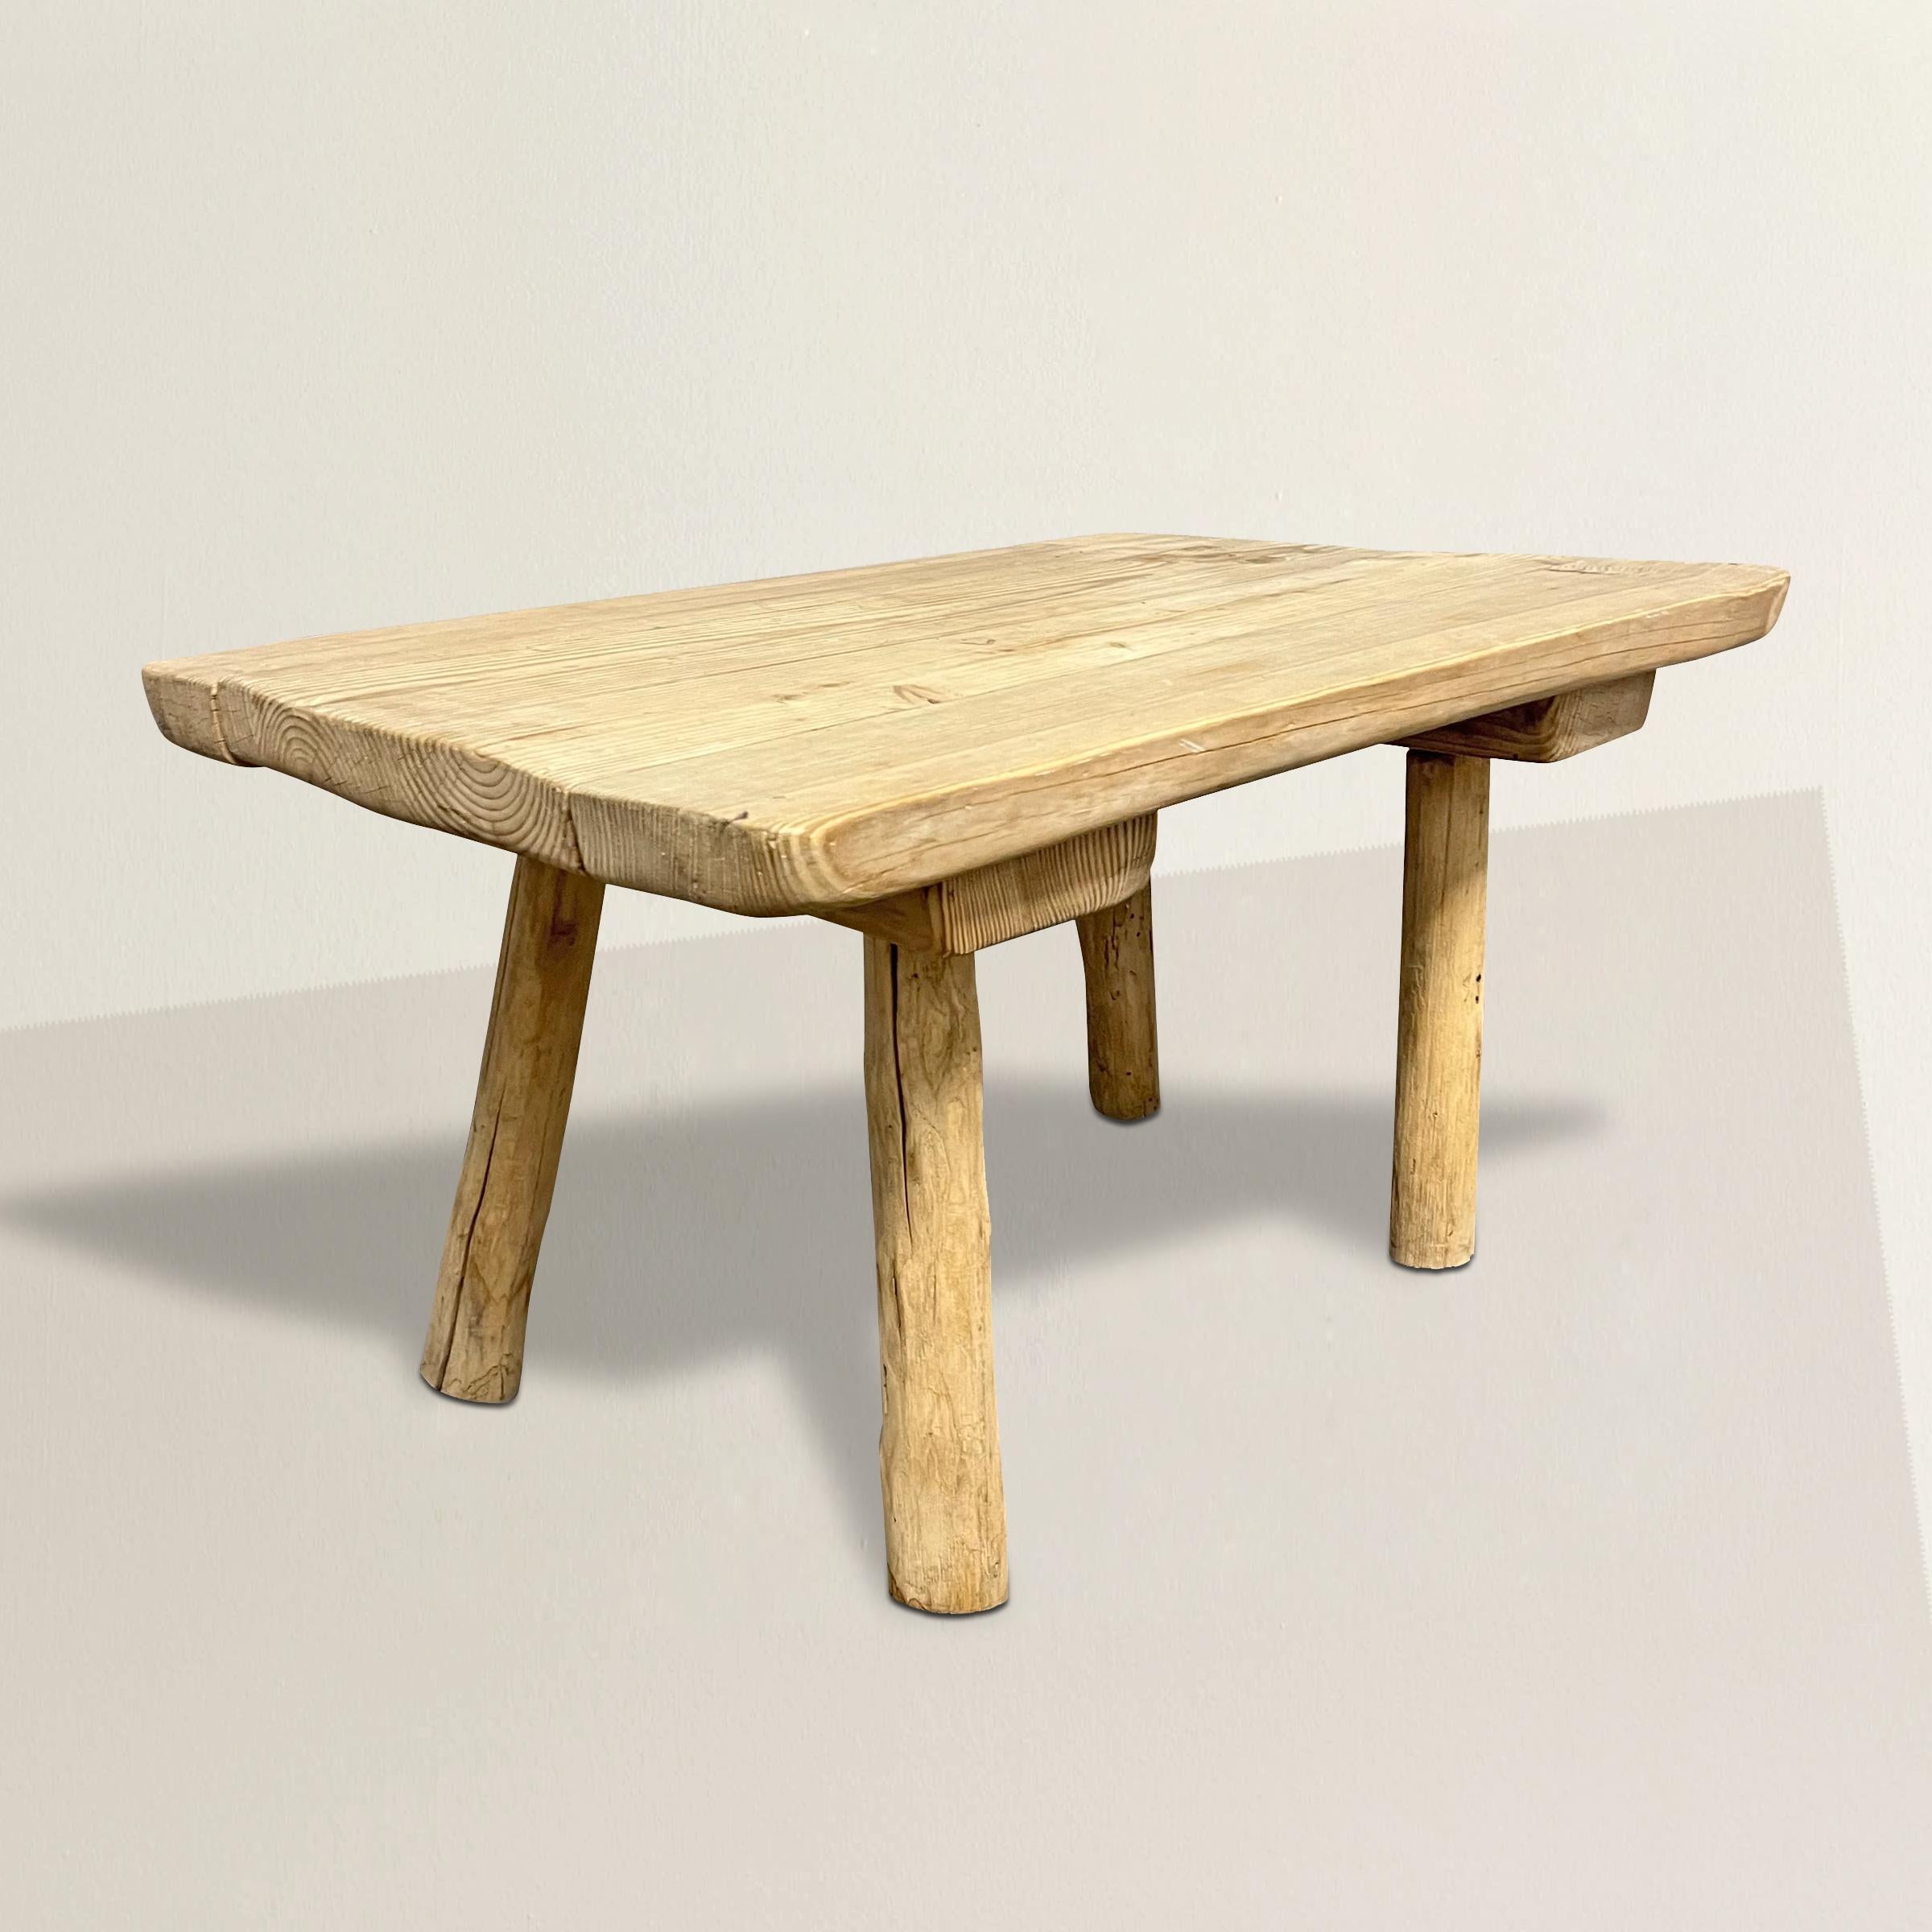 This exquisite 1950s French modernist pine low table, executed in the true Modernist spirit, embodies the essence of timeless elegance and functionality. Characterized by clean lines, minimalist form, and a harmonious blend of function and